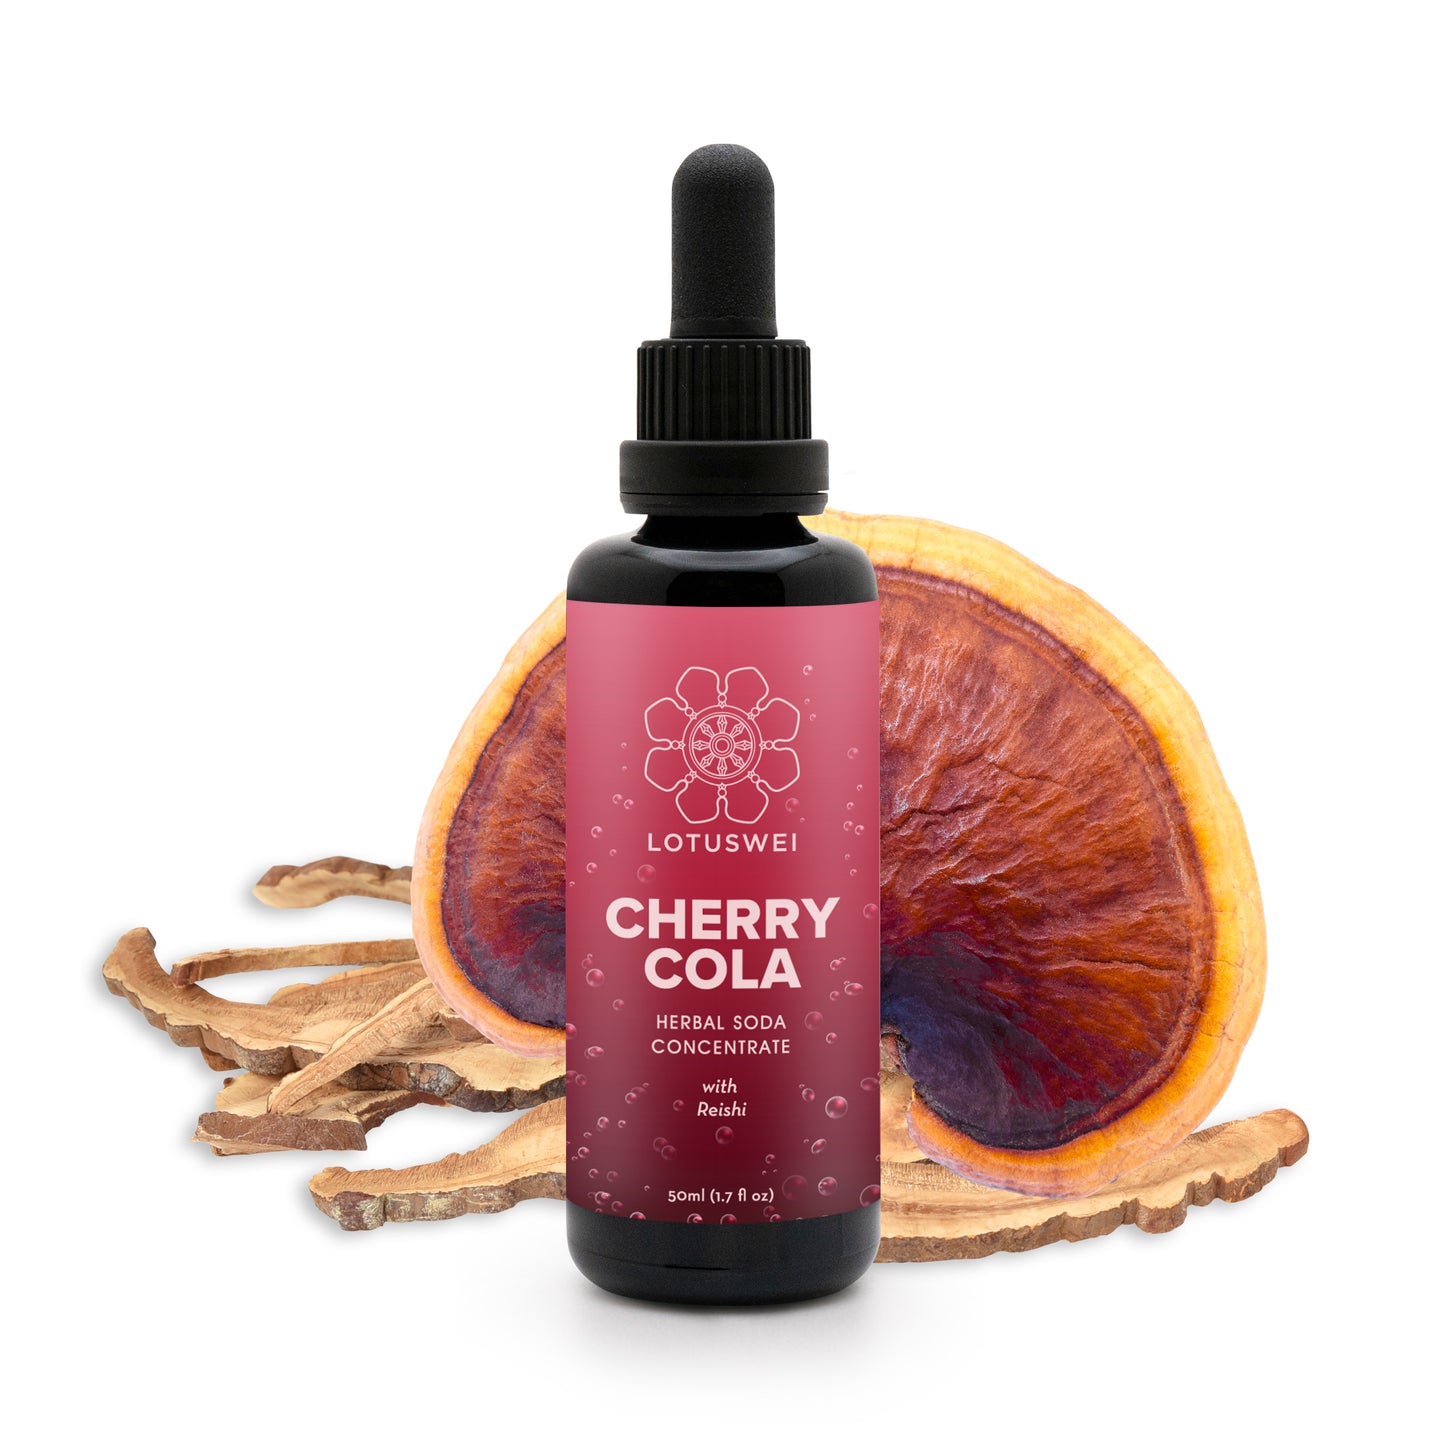 Cherry cola herbal soda concentrate 50ml